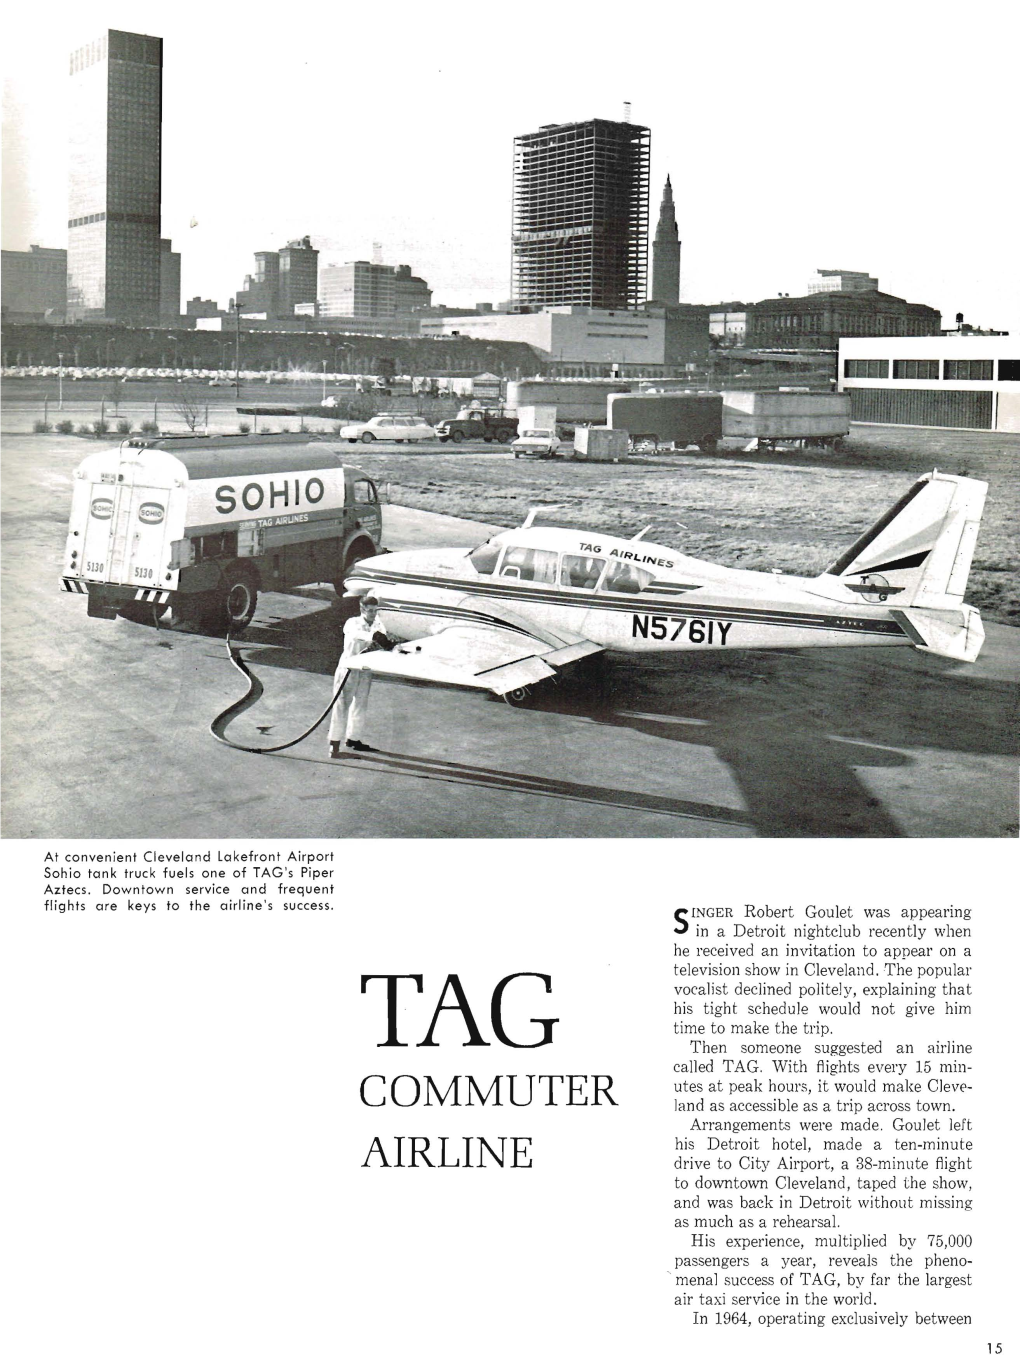 Commuter Airline Service